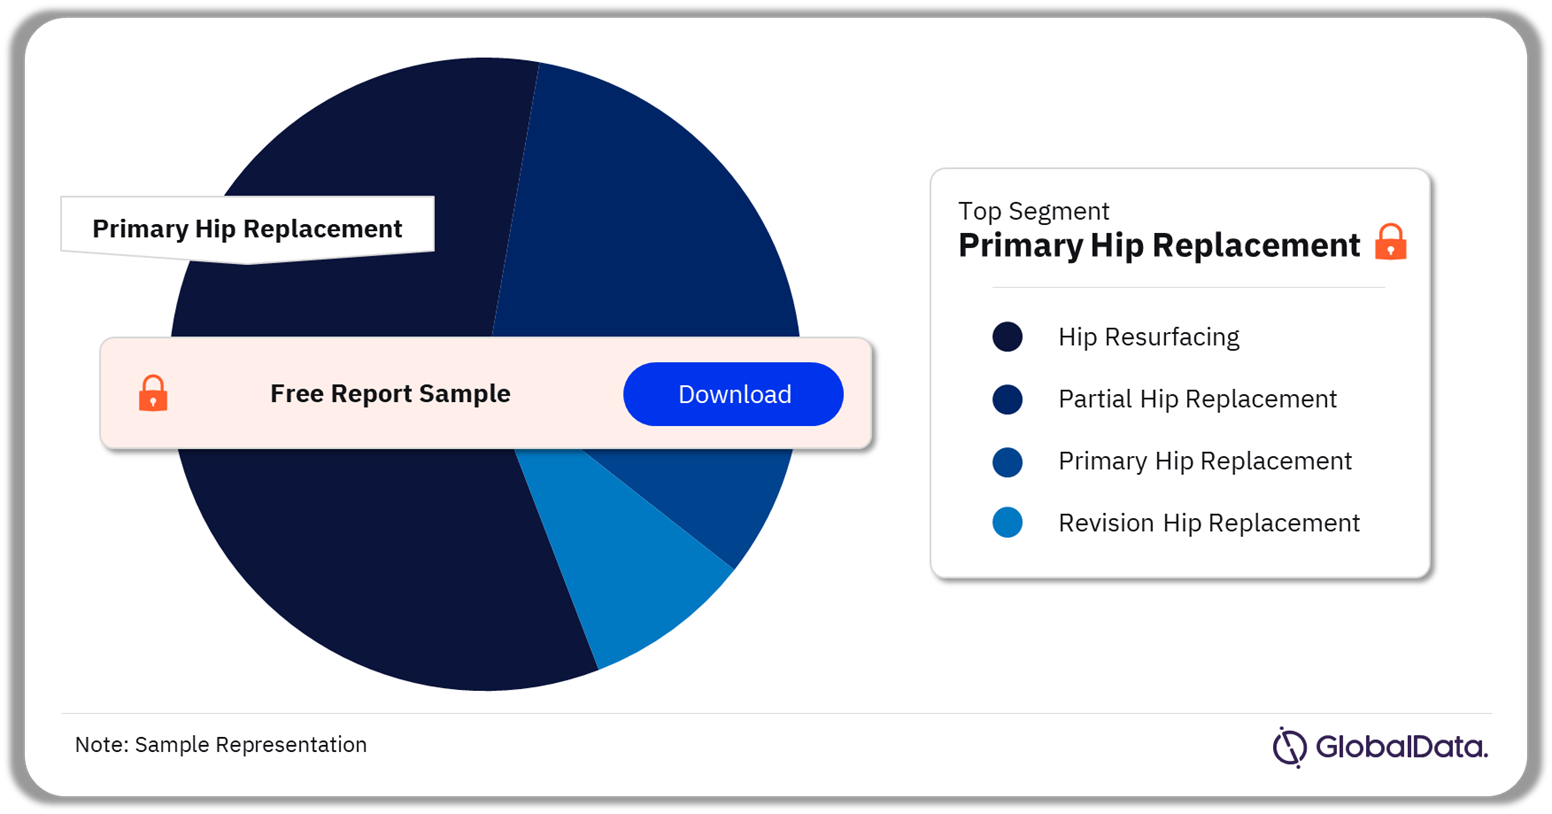 Hip Reconstruction Market Analysis by Segments, 2023 (%)